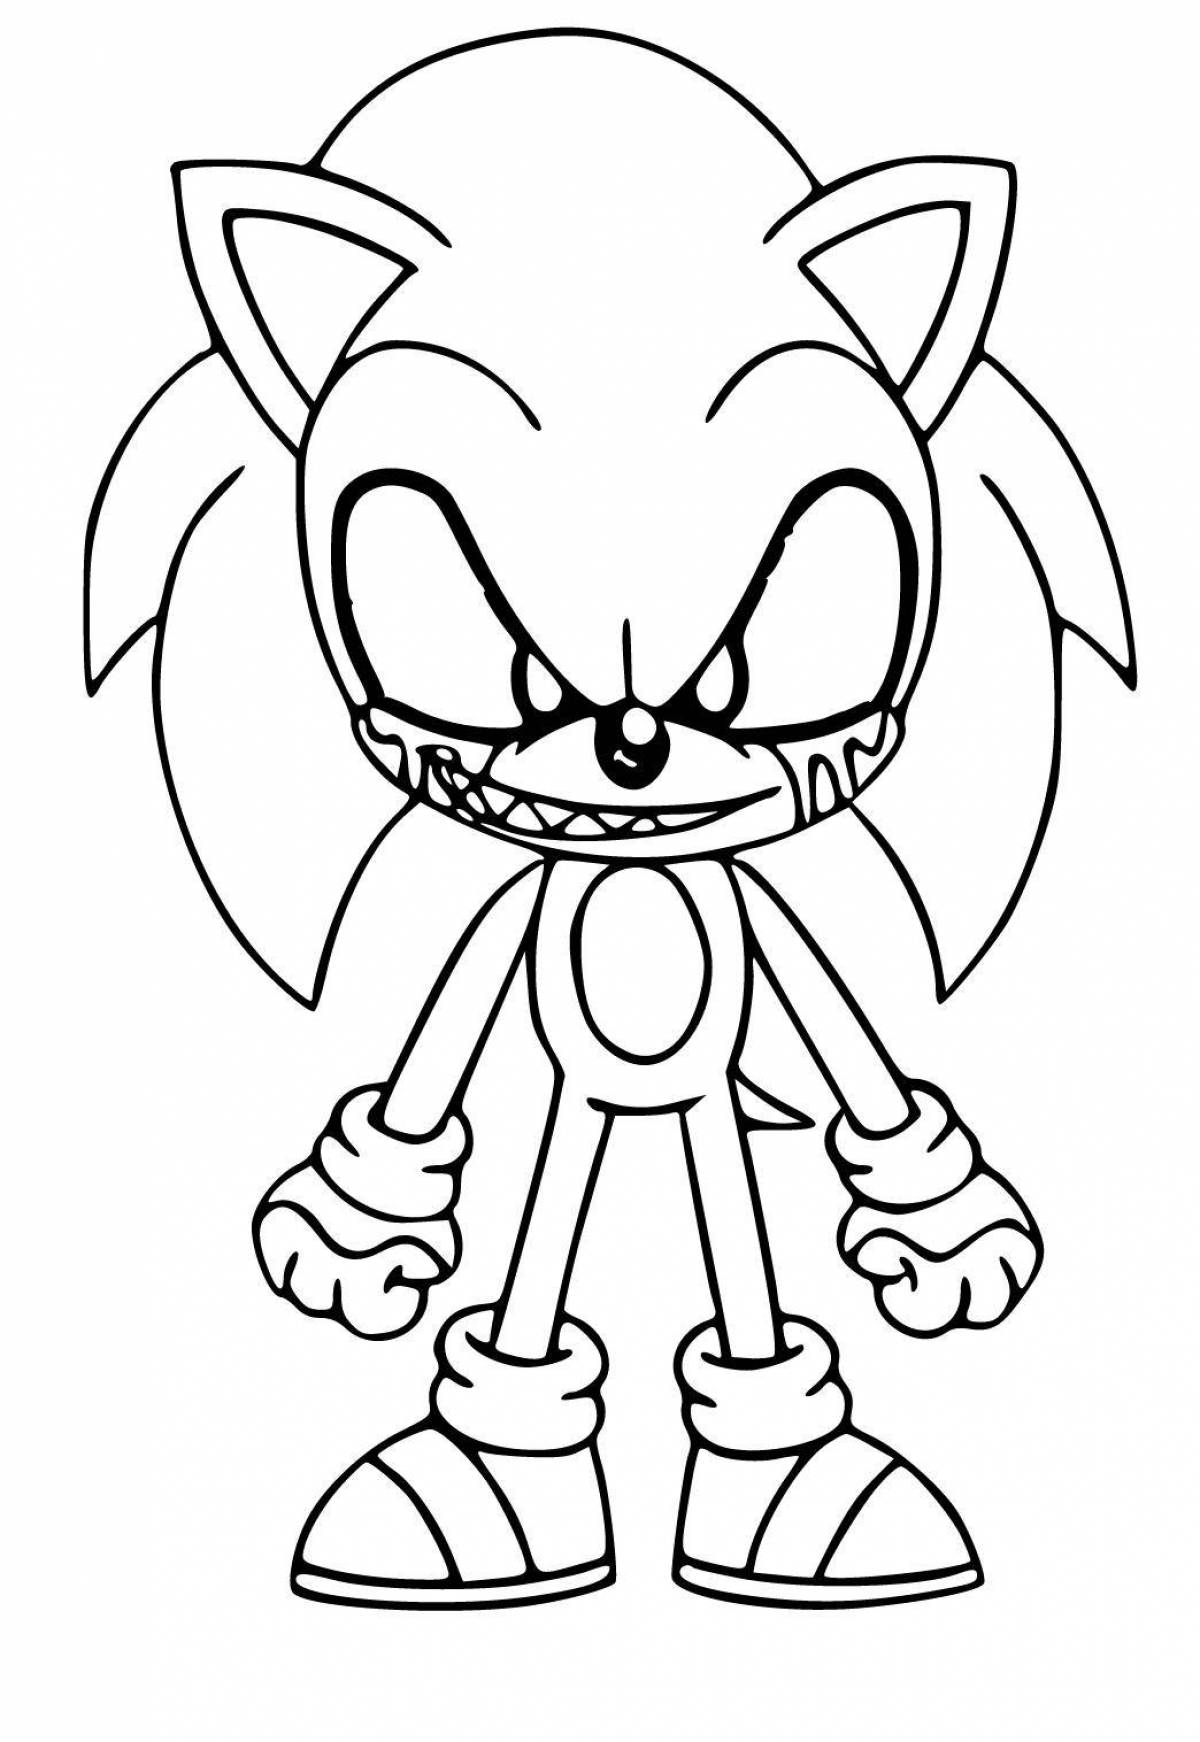 Great sonic coloring book